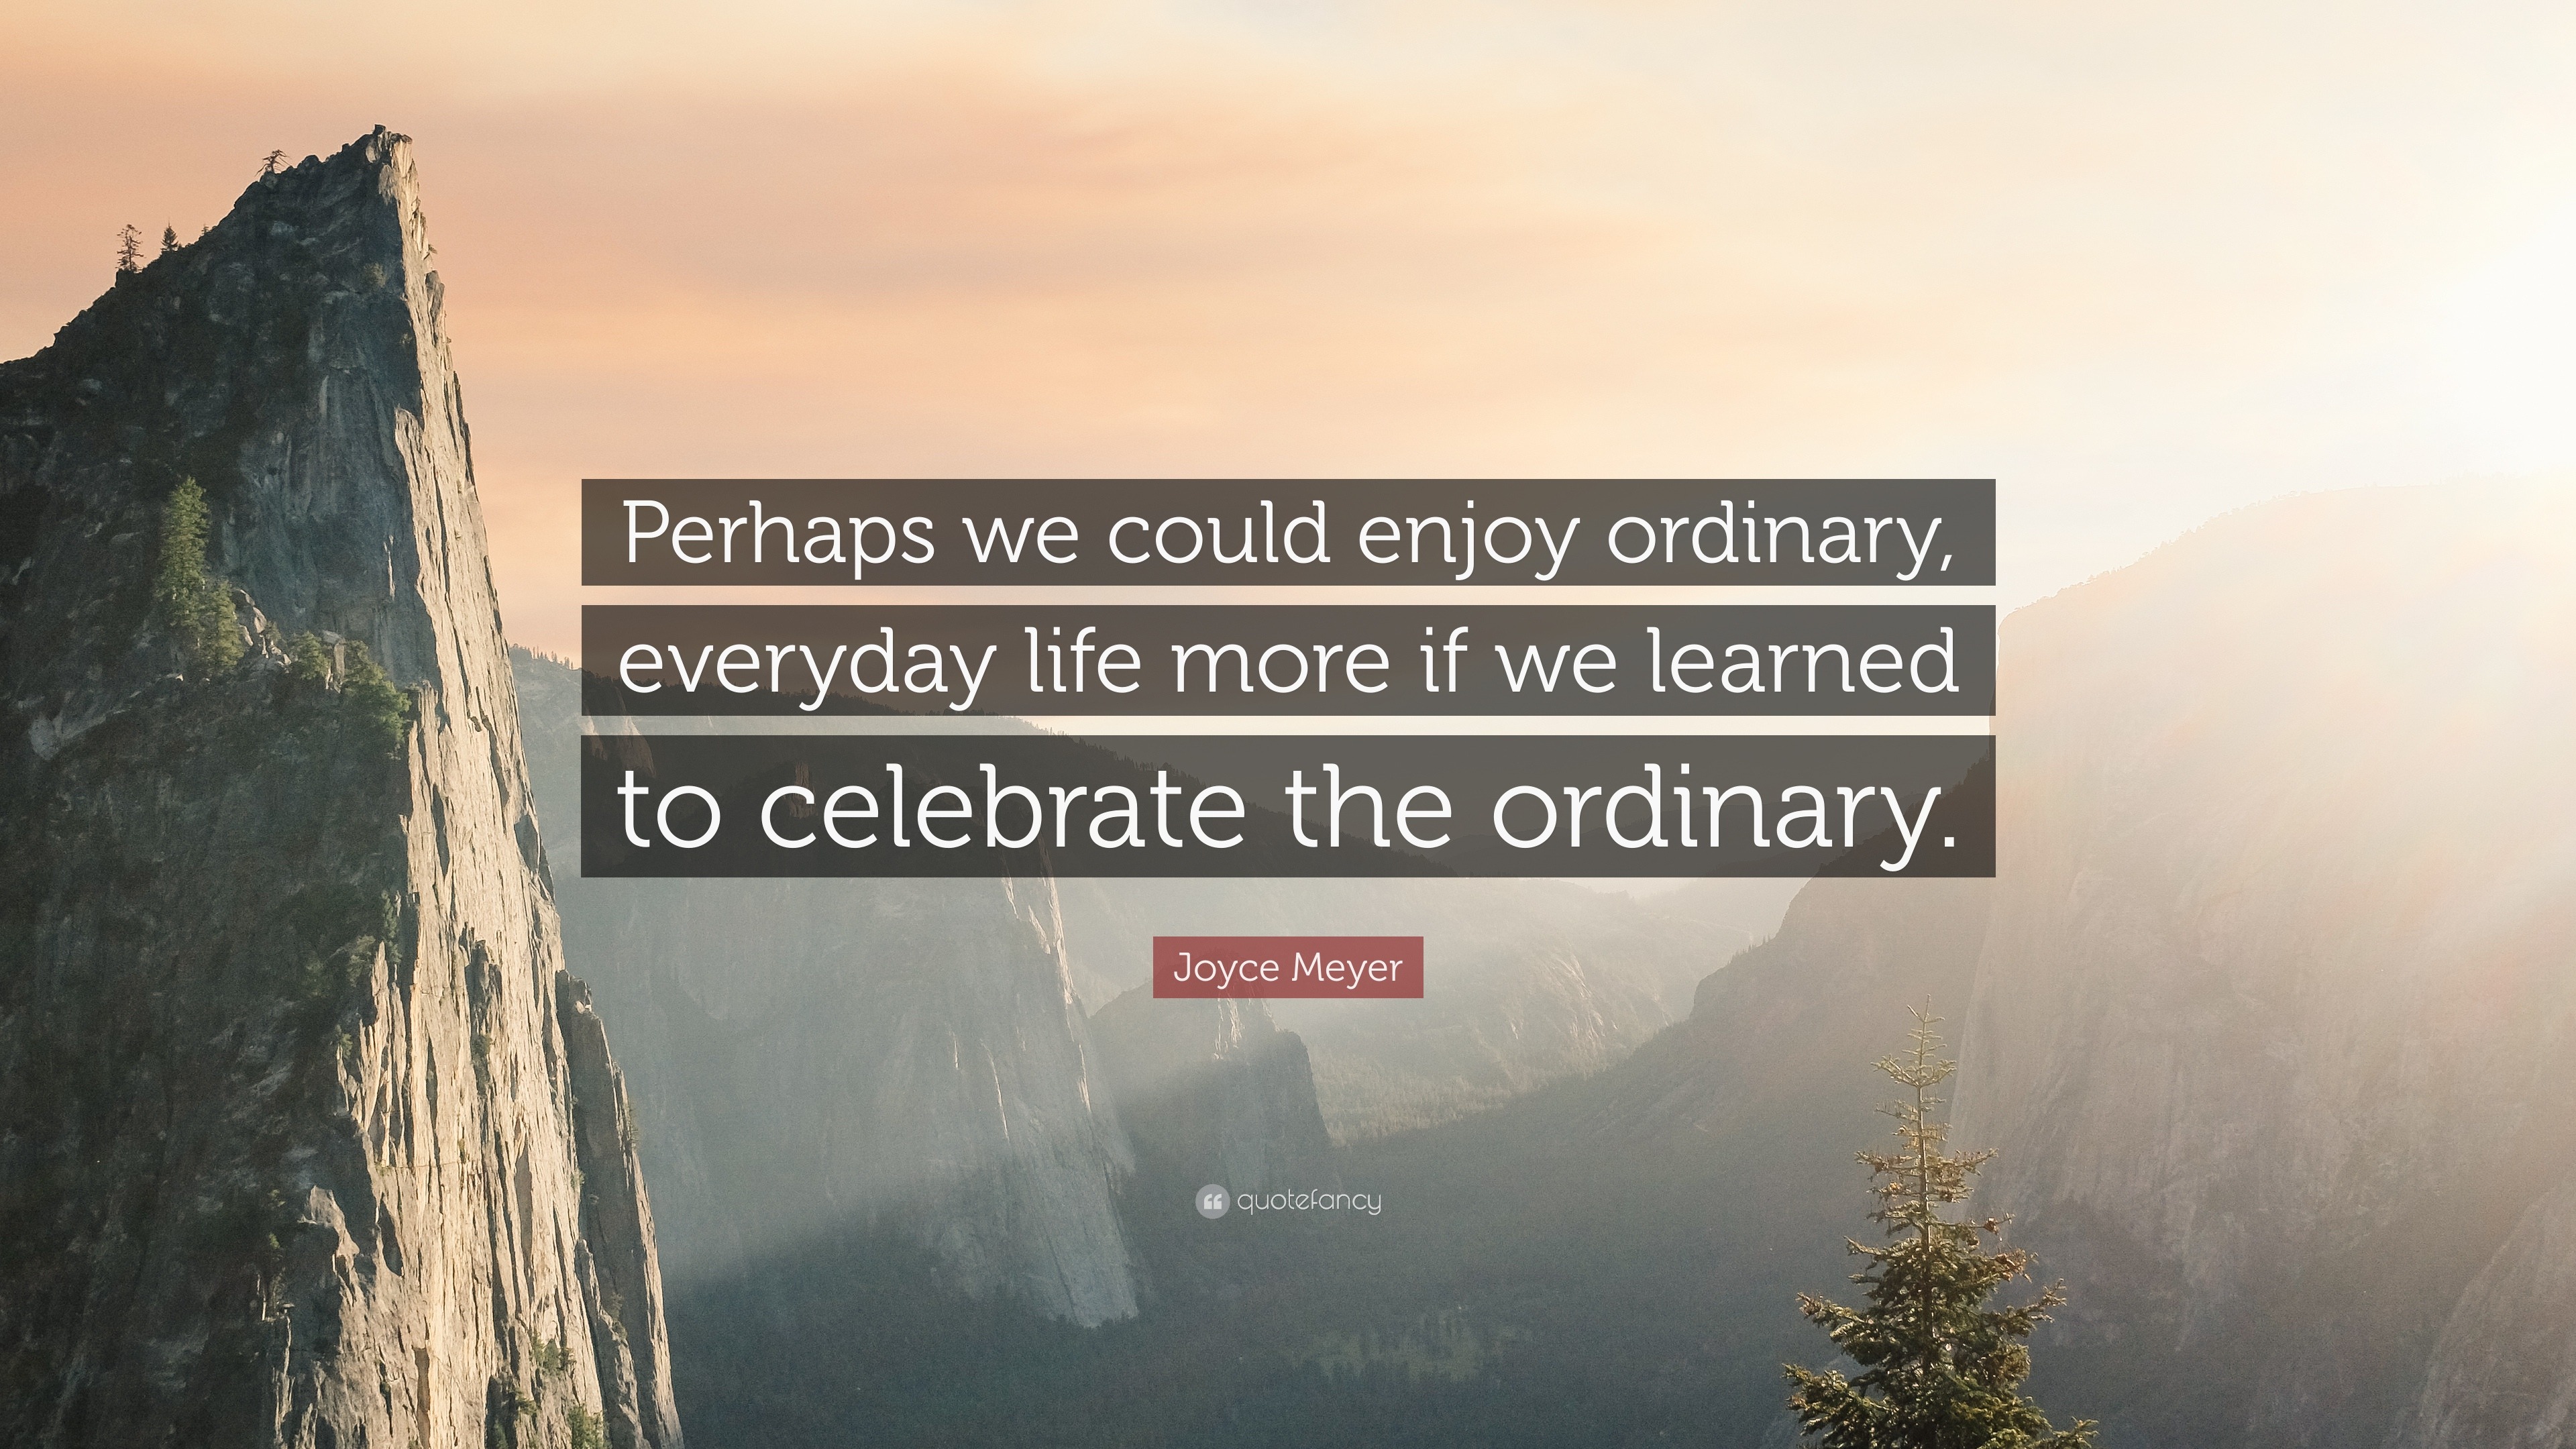 Joyce Meyer Quote “Perhaps we could enjoy ordinary